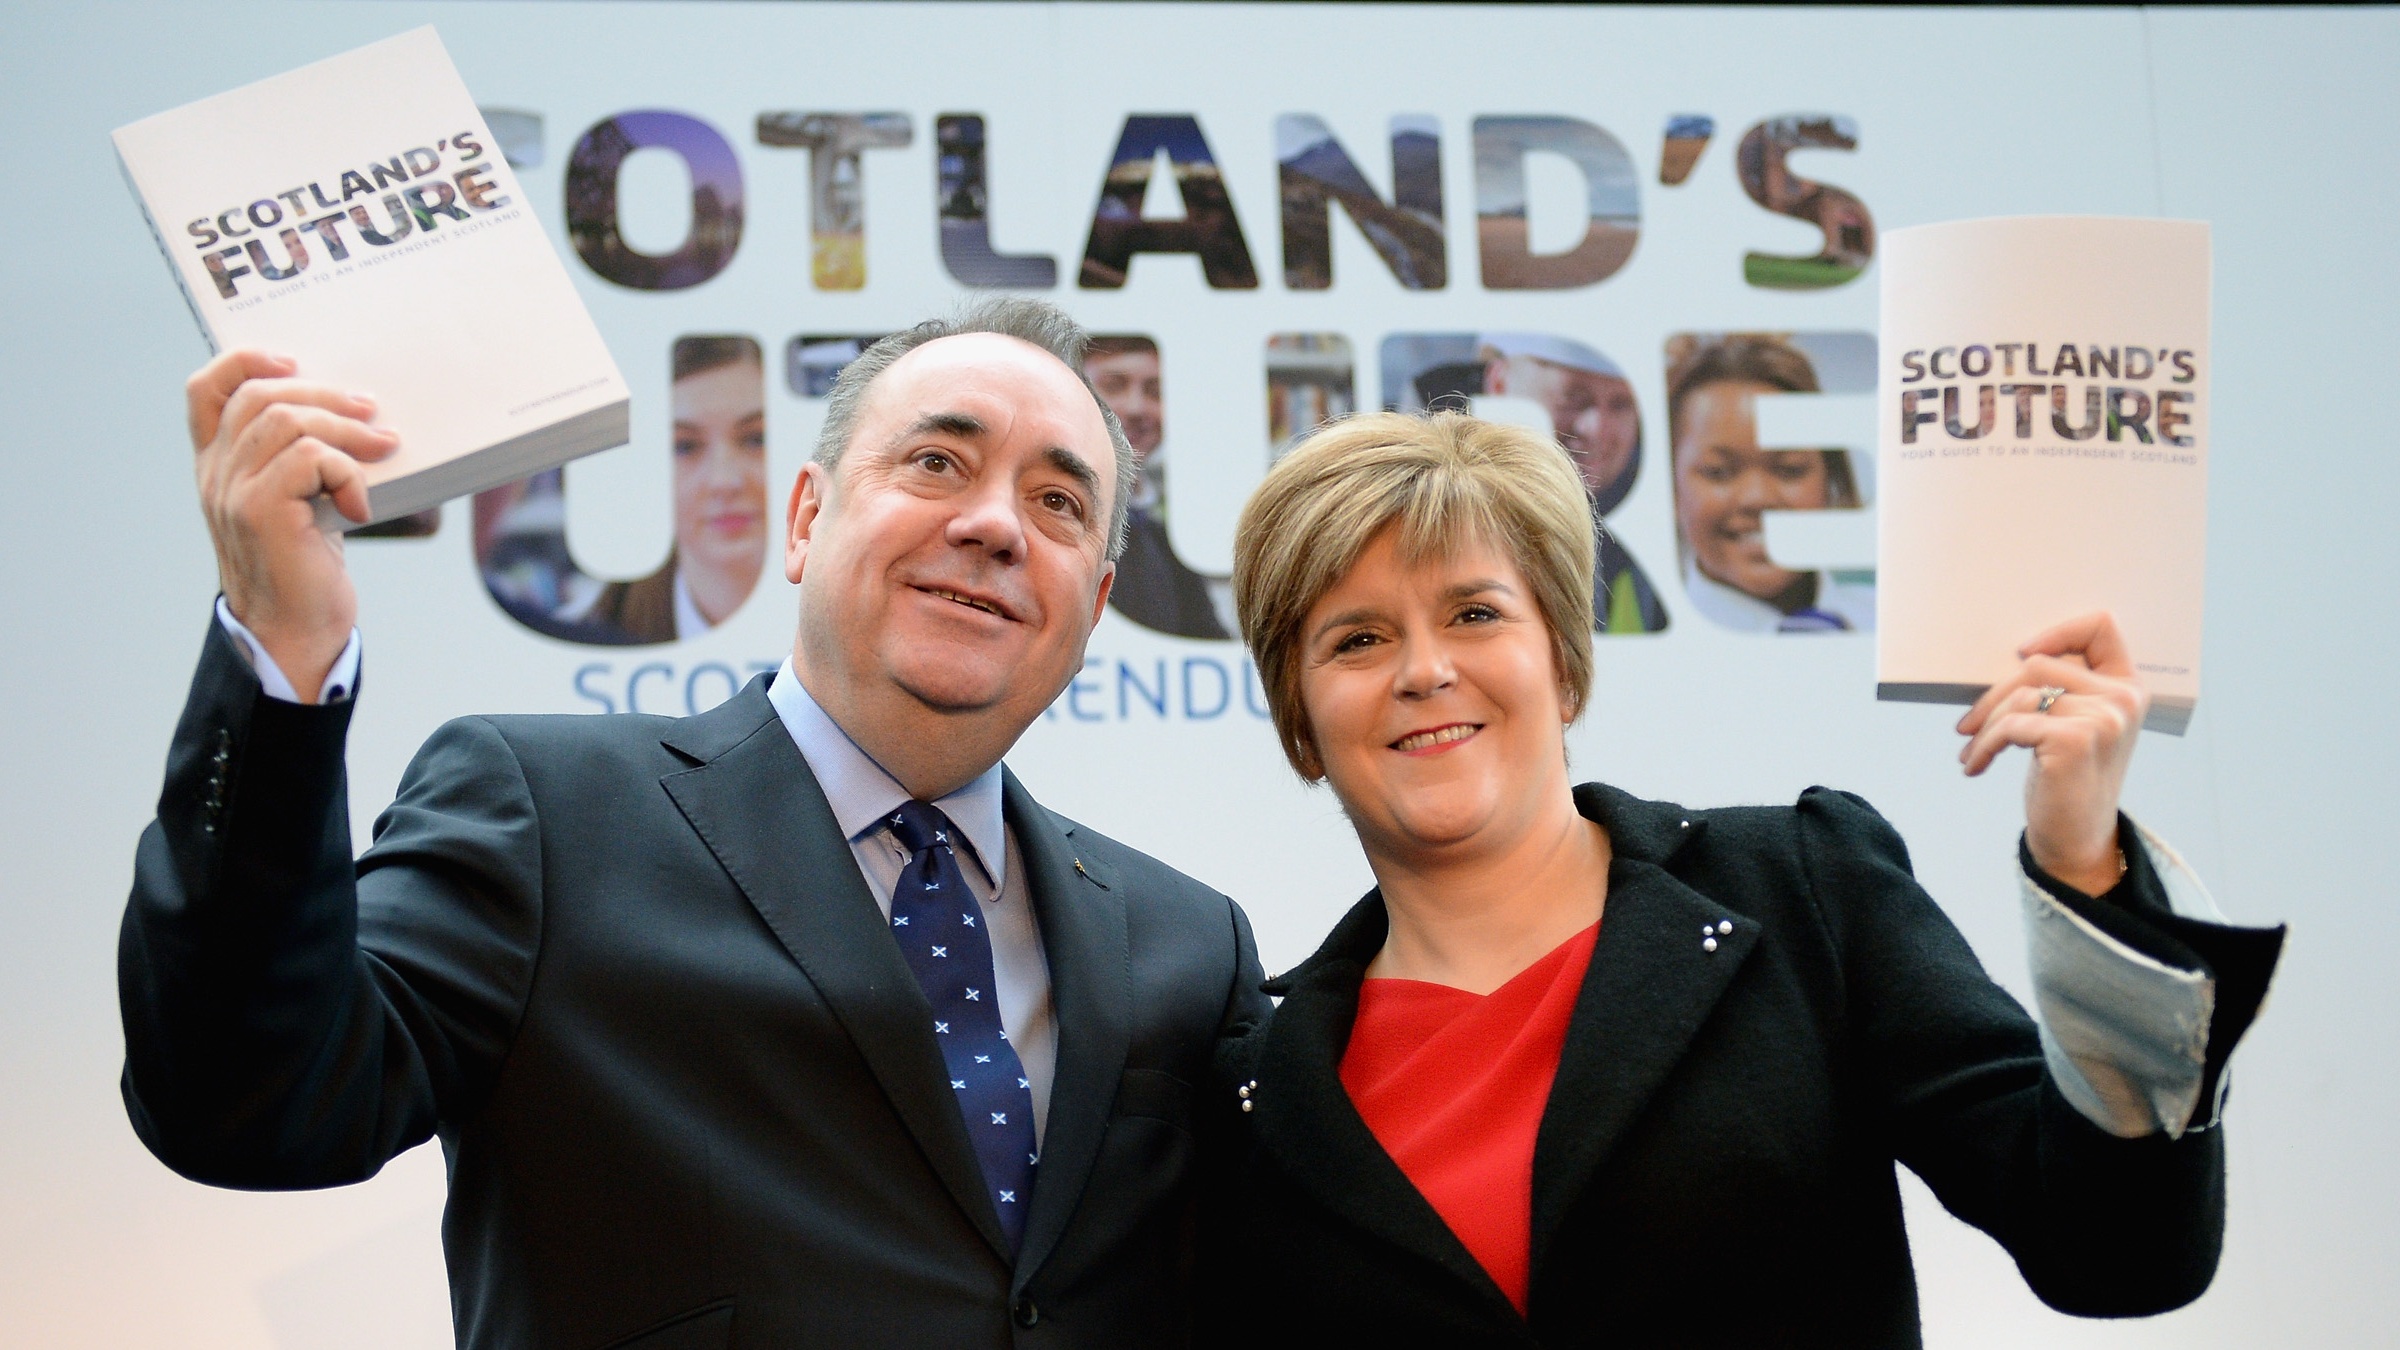 Nicola Sturgeon and Alex Salmond present the White Paper for Scottish independence in 2013